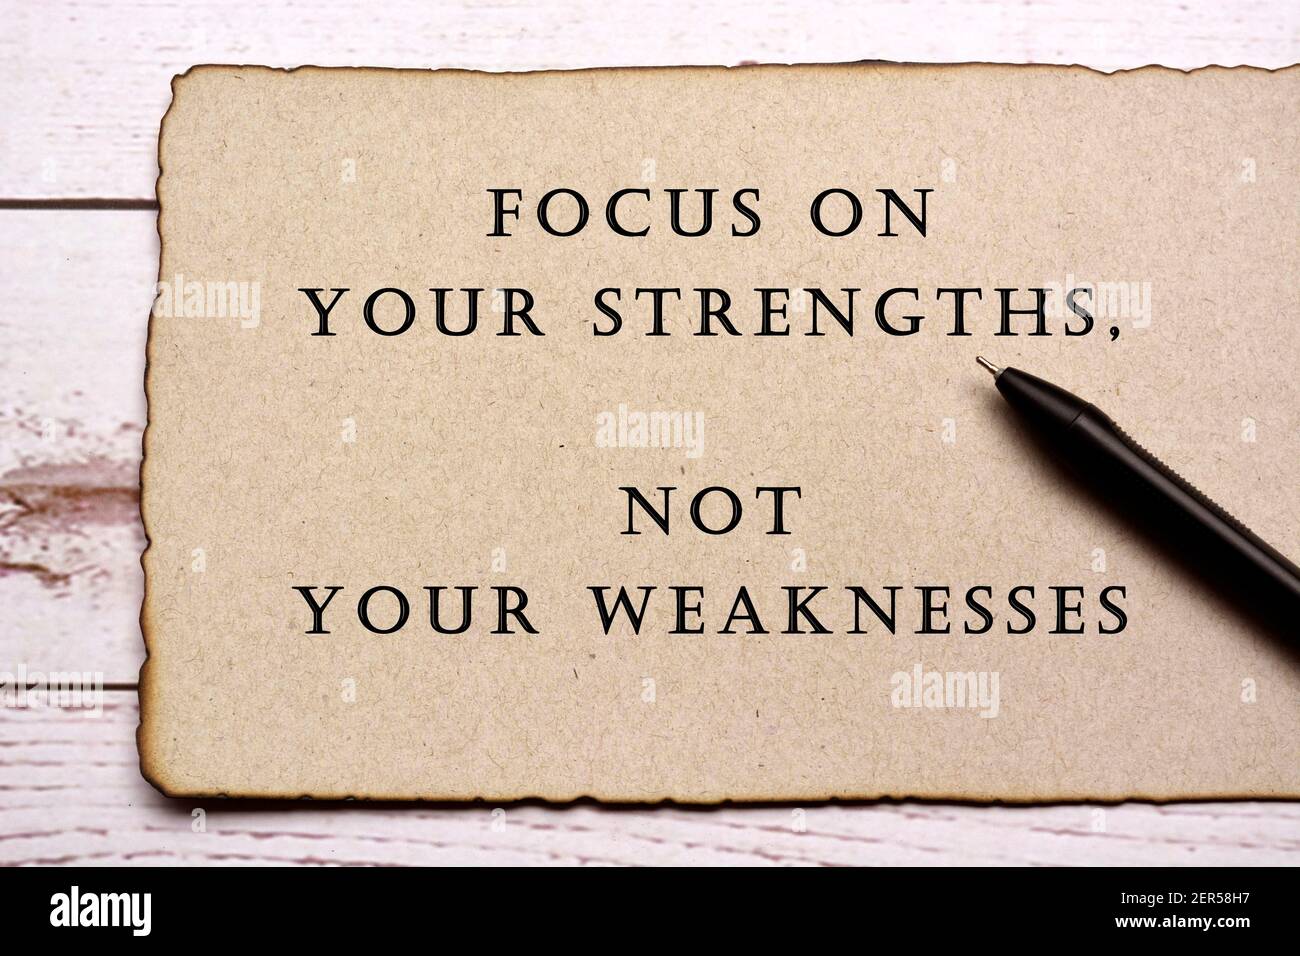 Motivational and inspirational quote on burnt edge brown paper with pen on wooden desk - Focus on your strengths, not your weaknesses Stock Photo